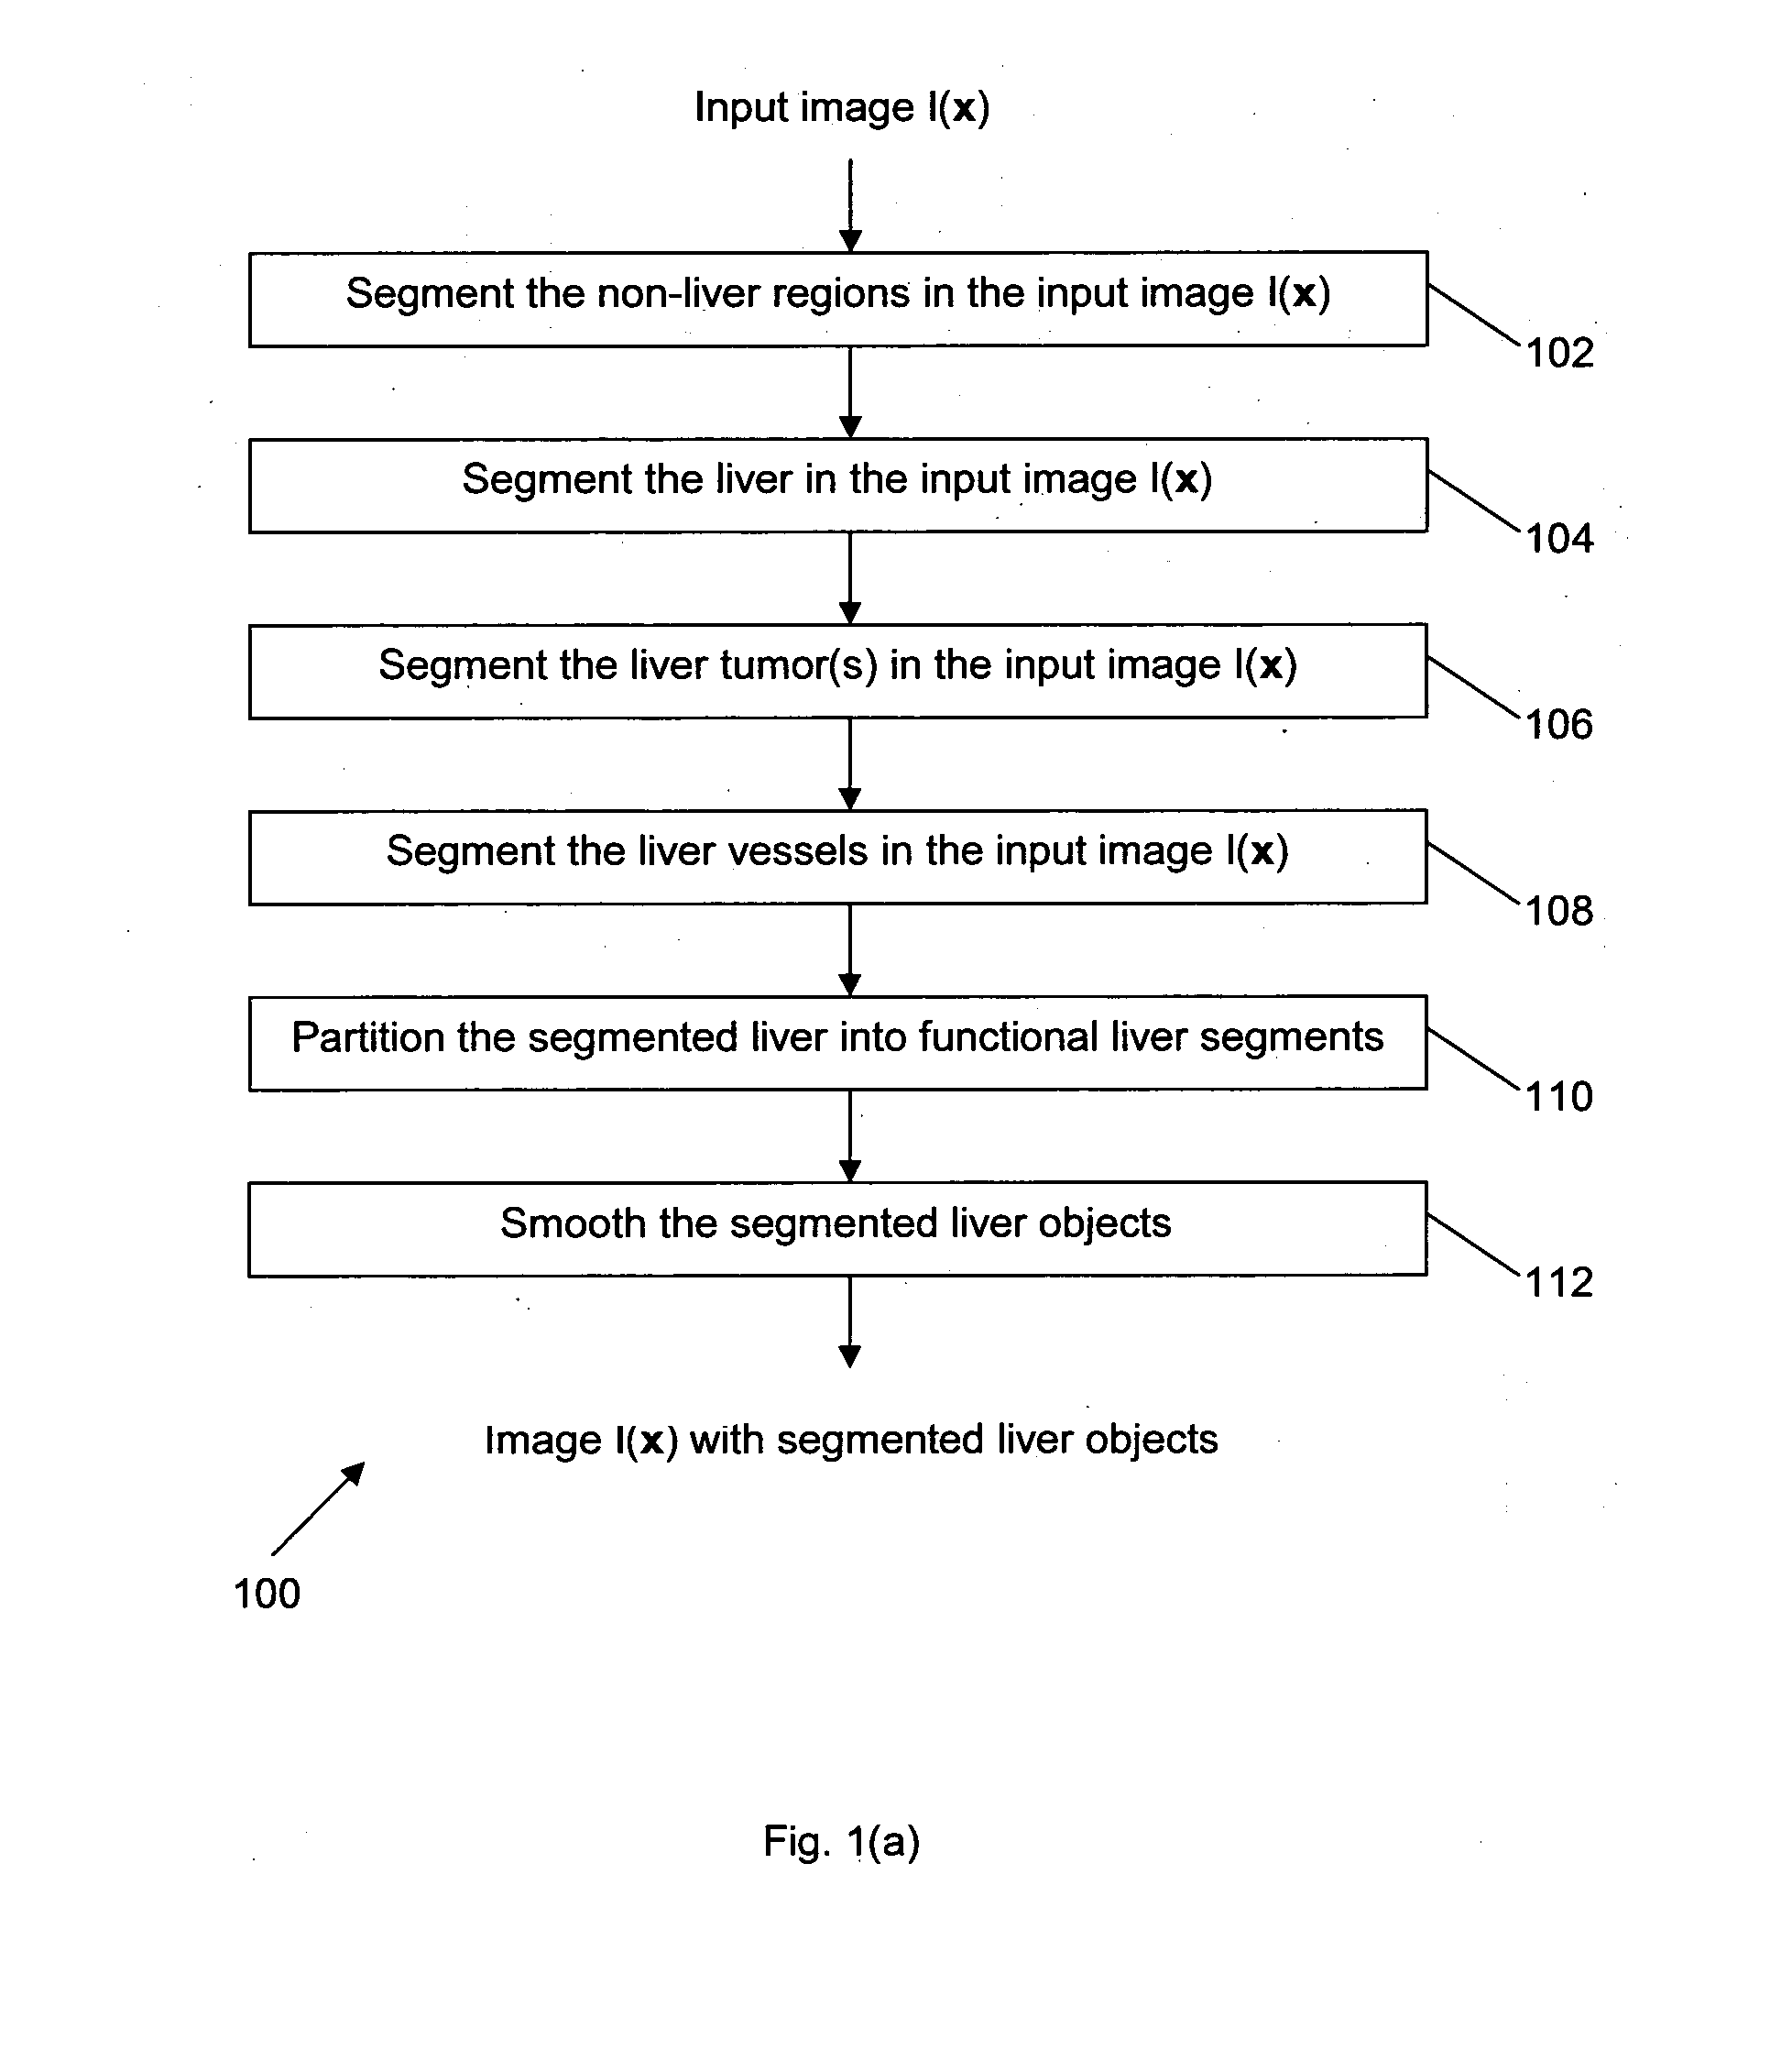 Method and system for segmenting a liver object in an image